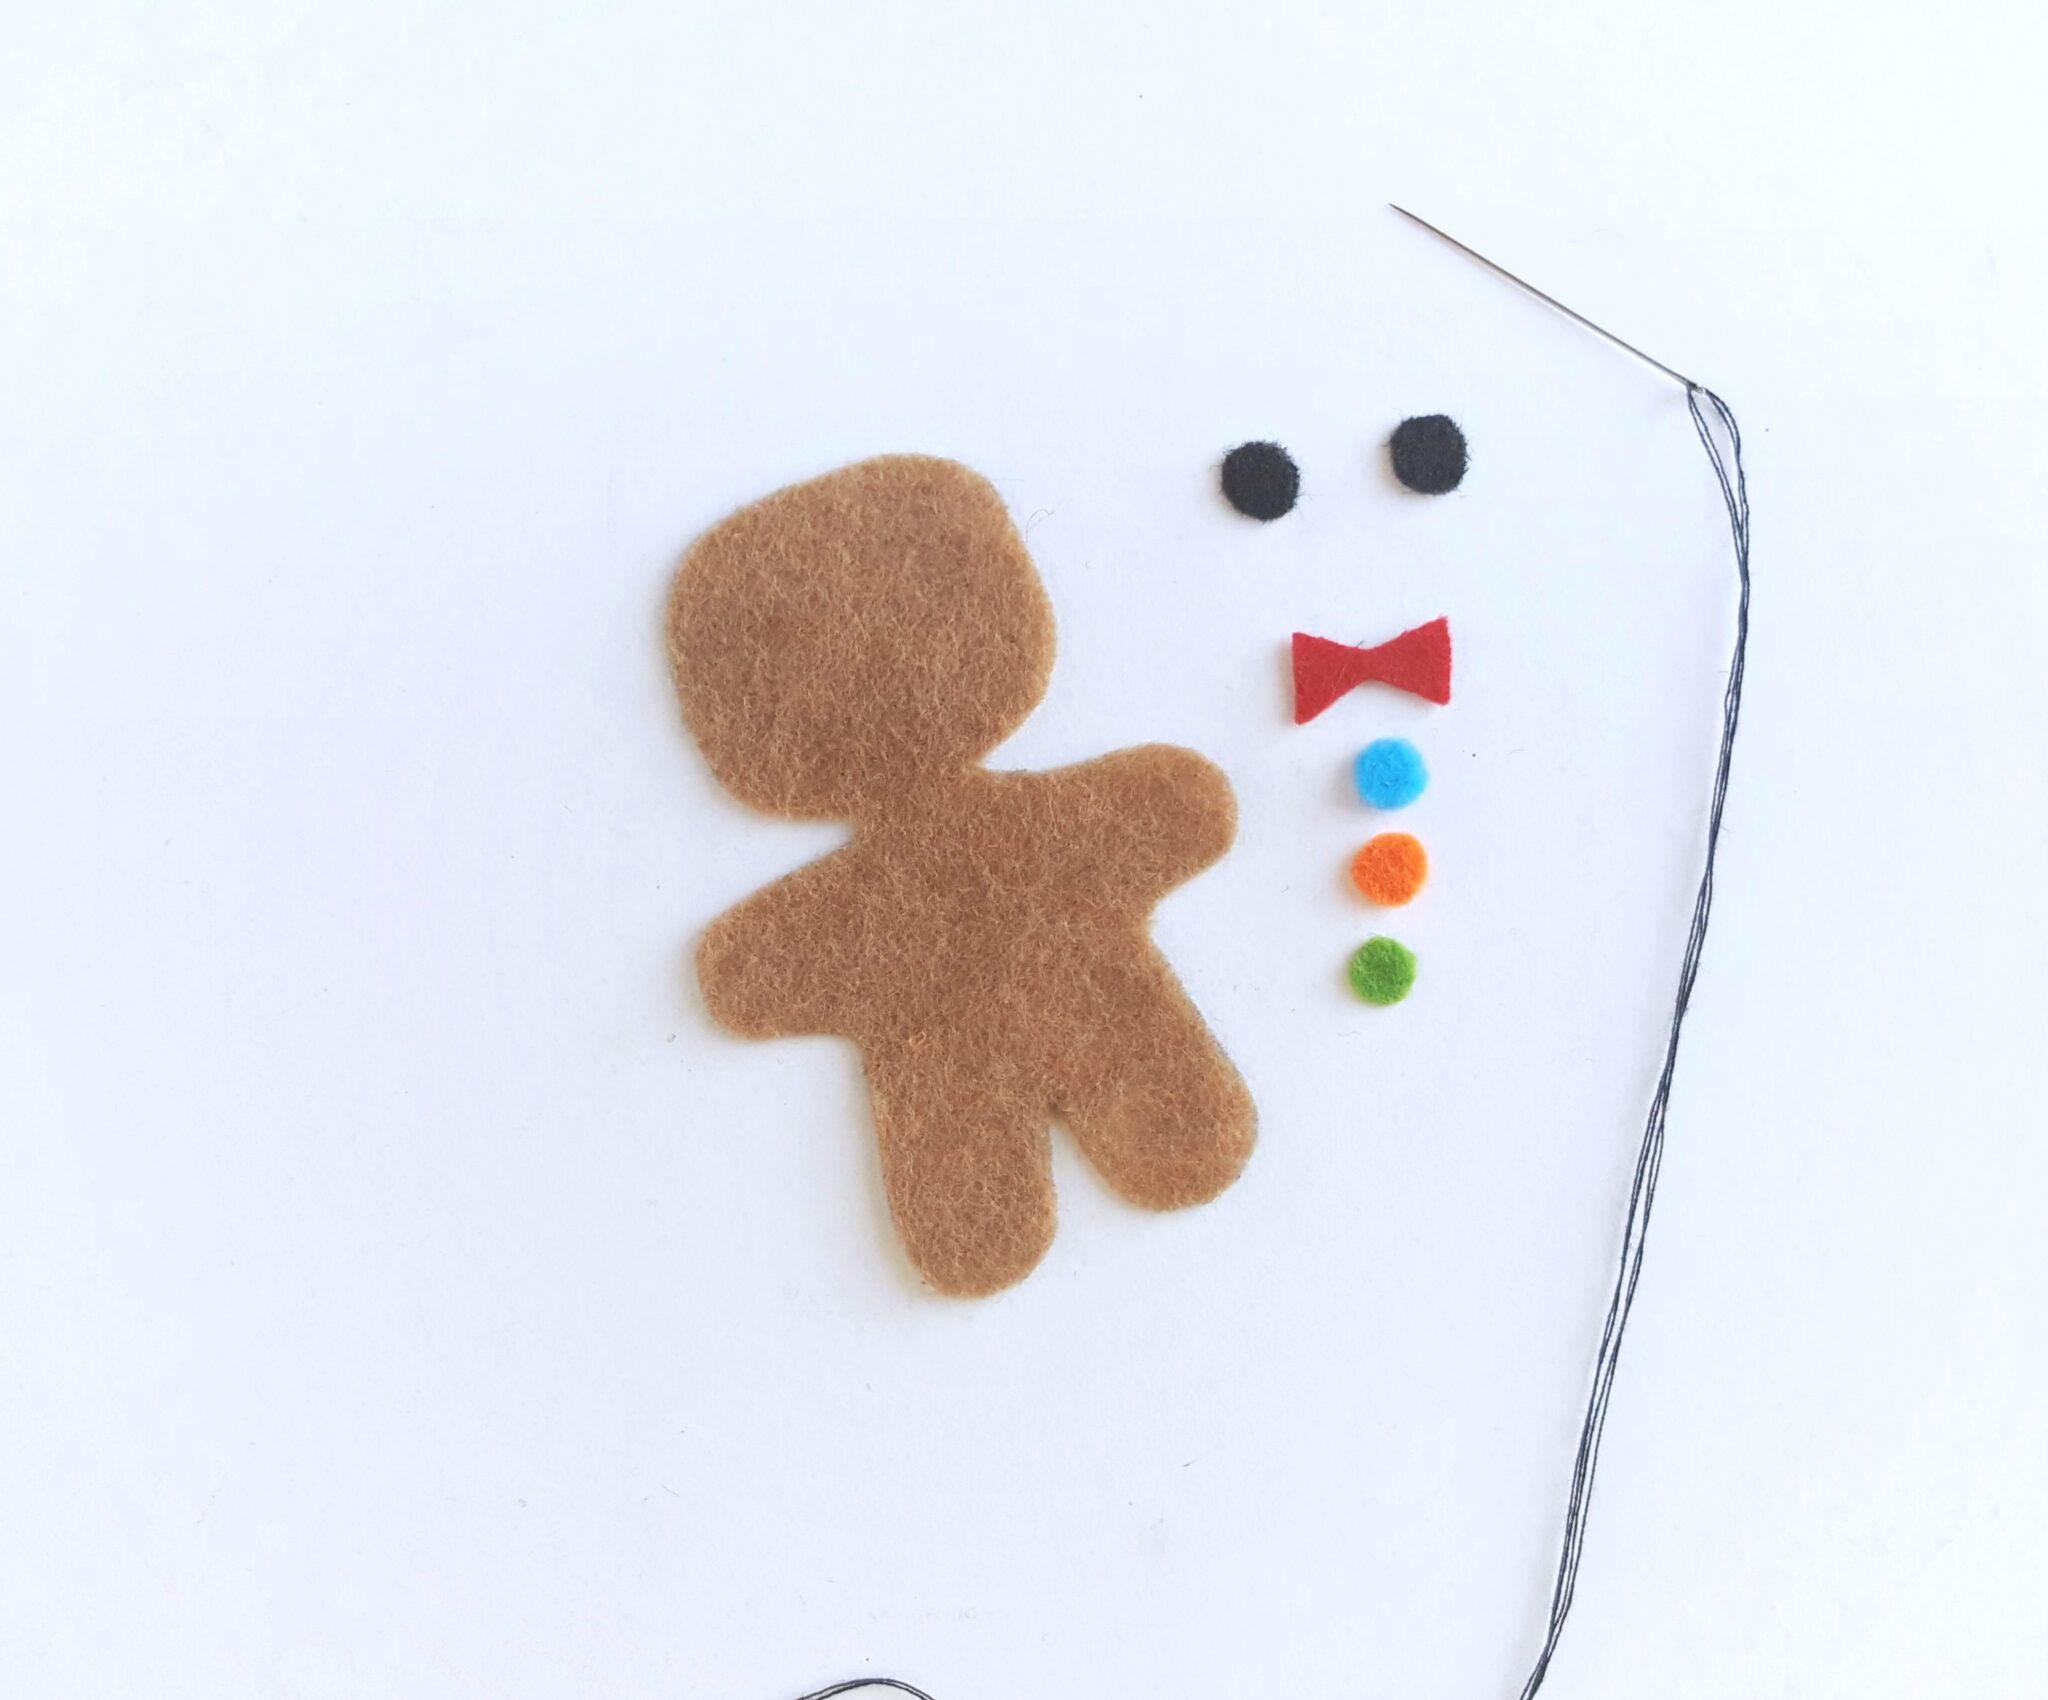 One brown felt cutout of a gingerbread man with eyes, bowtie, and gumdrop buttons.